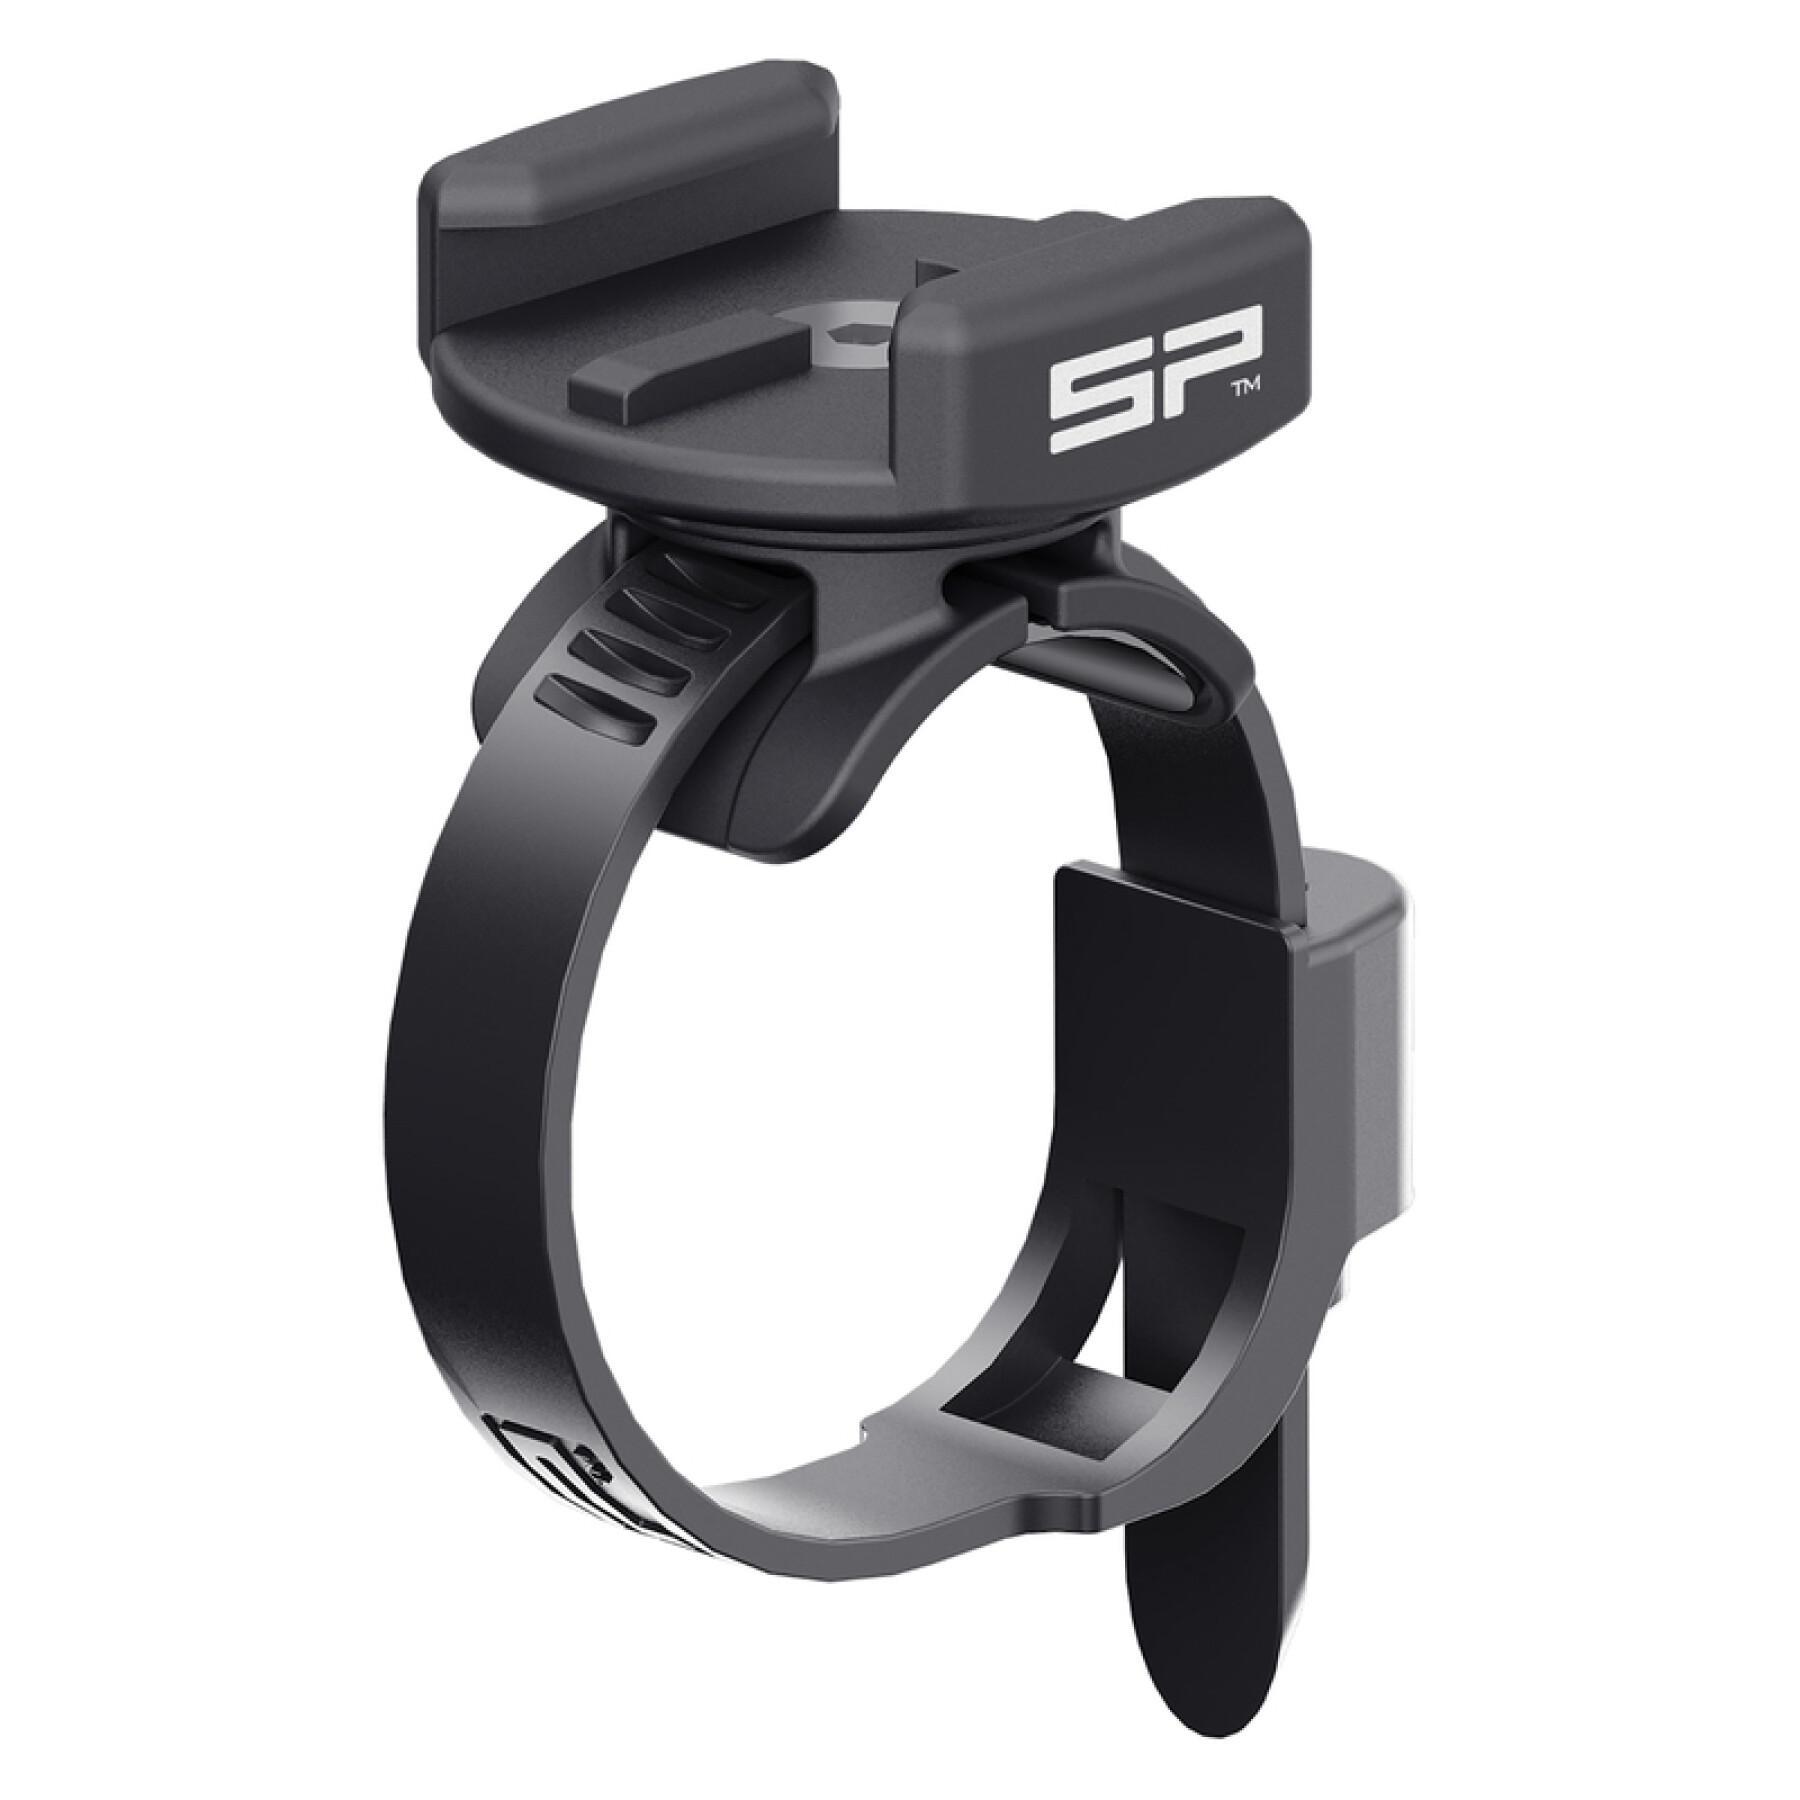 Phone holder SP Connect Samsung S9+/S8+